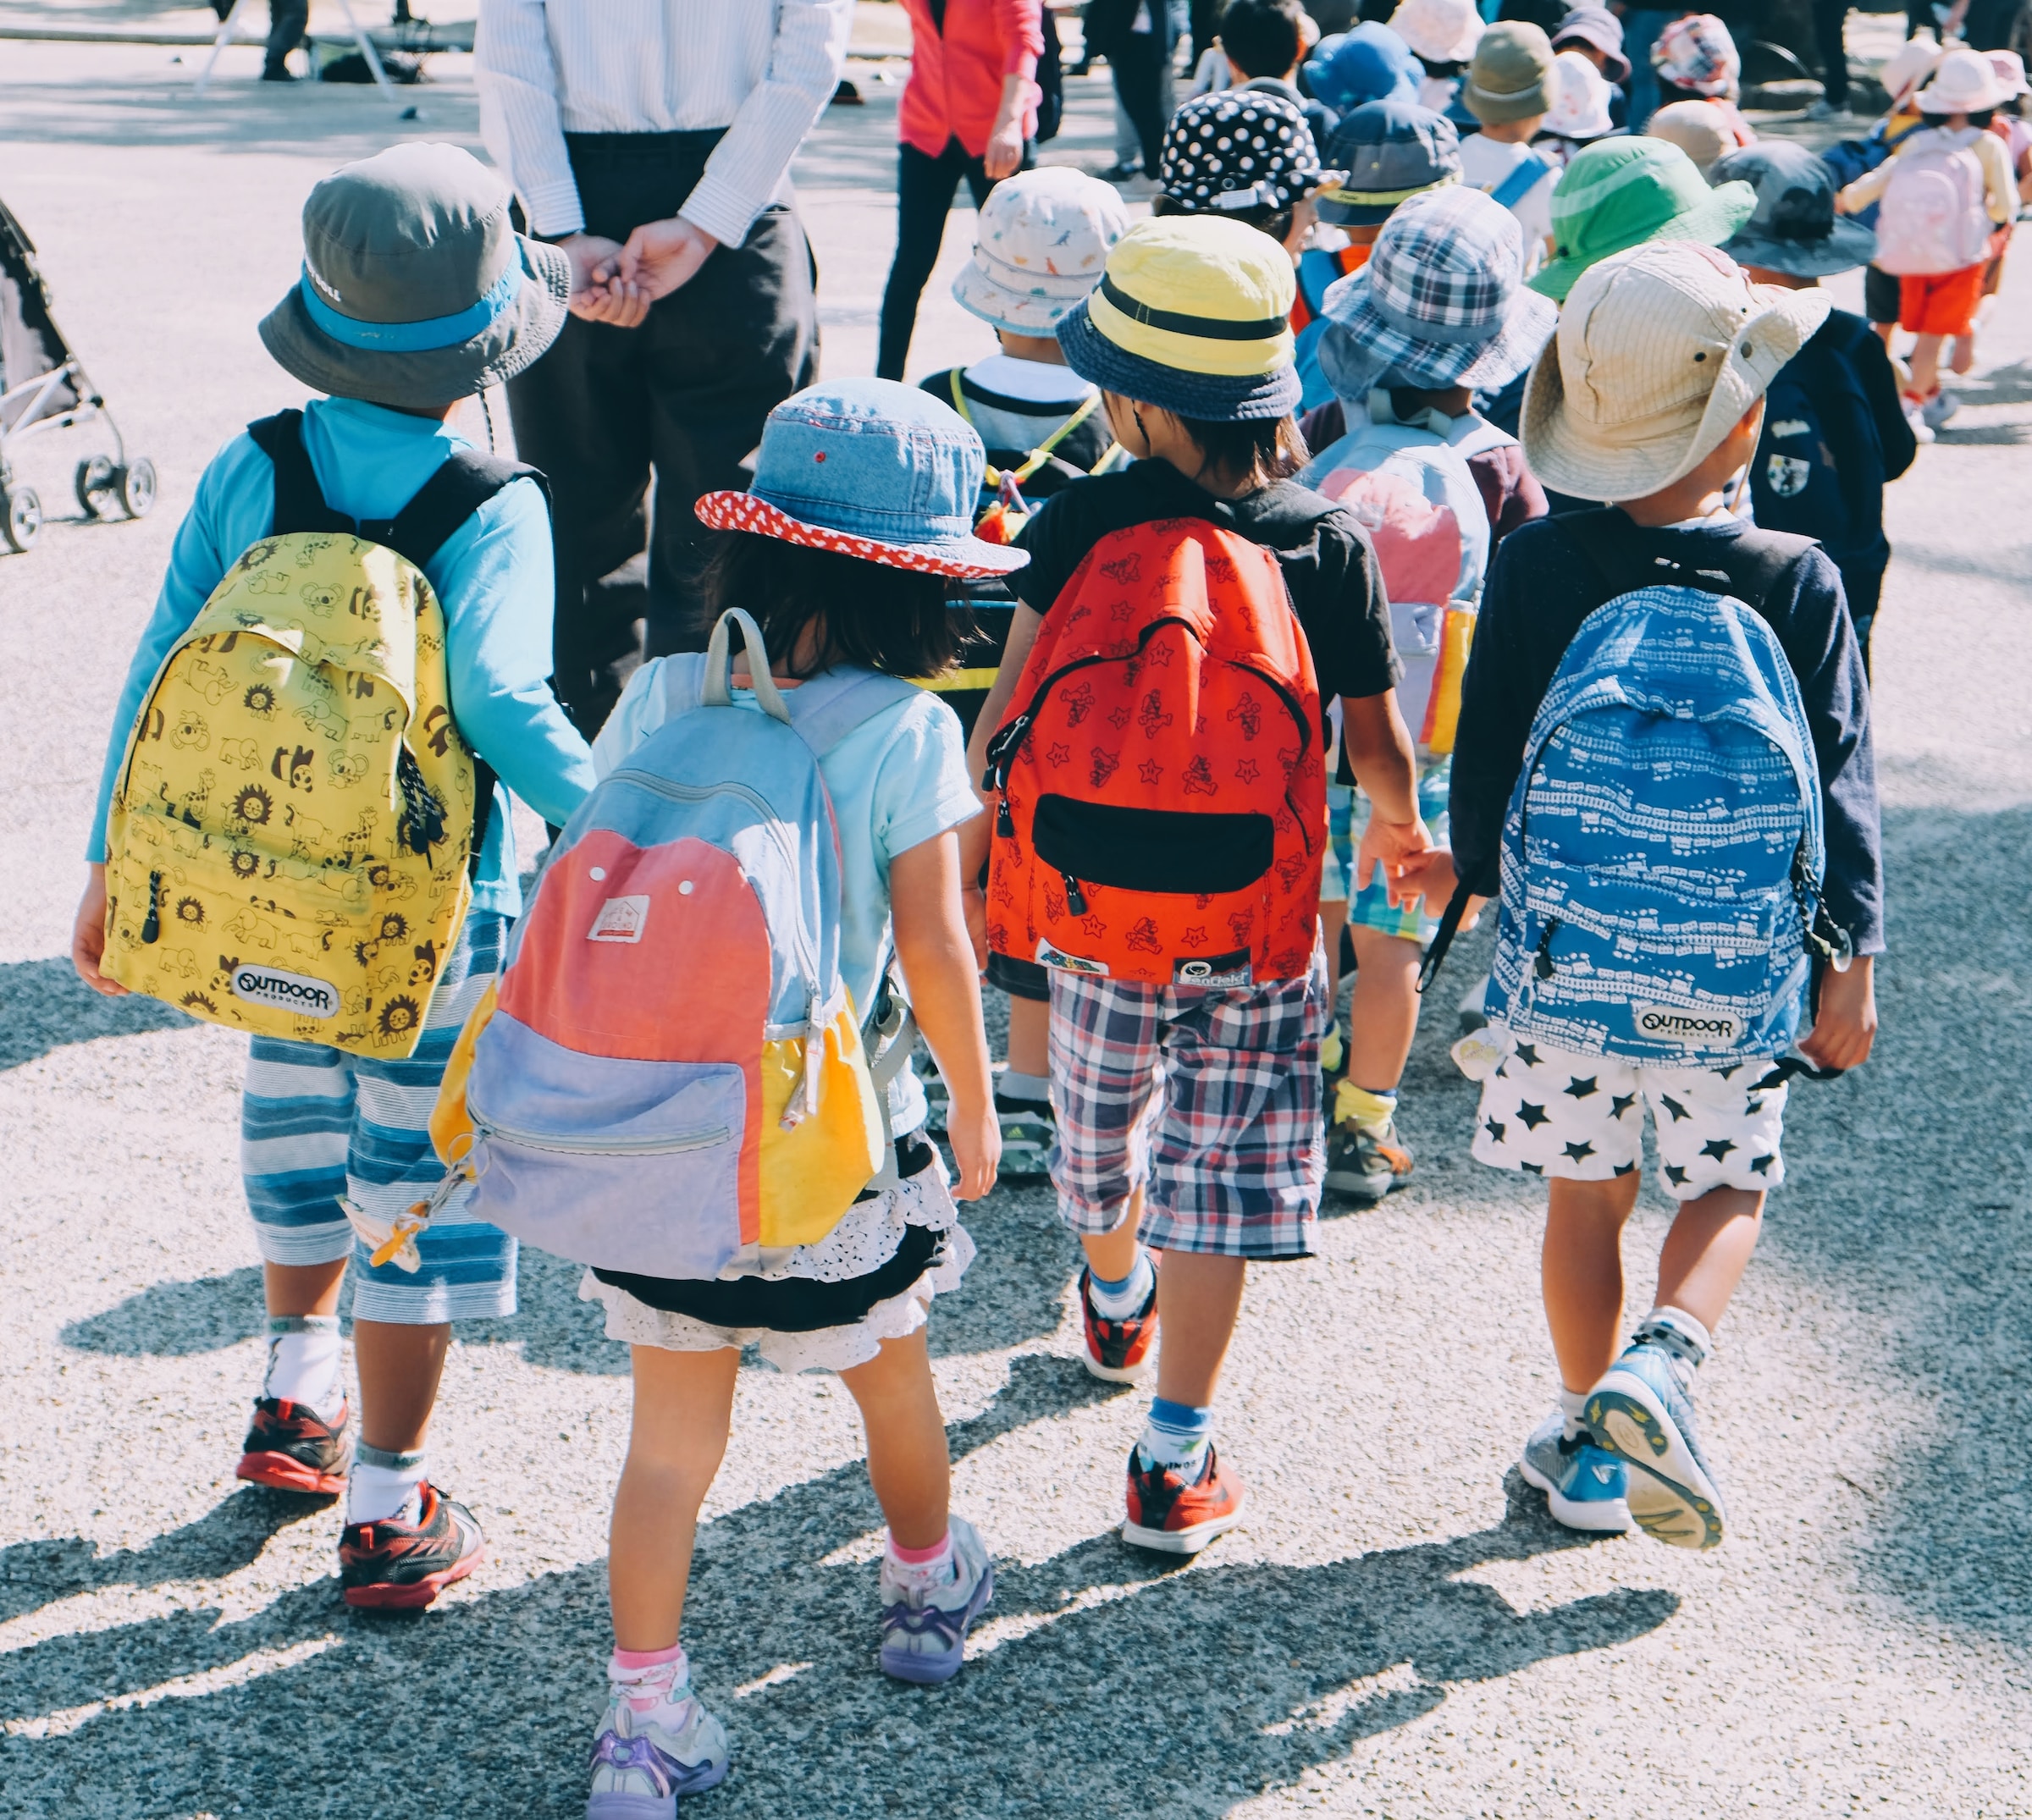 A group of young children carrying backpacks | Source: Unsplash